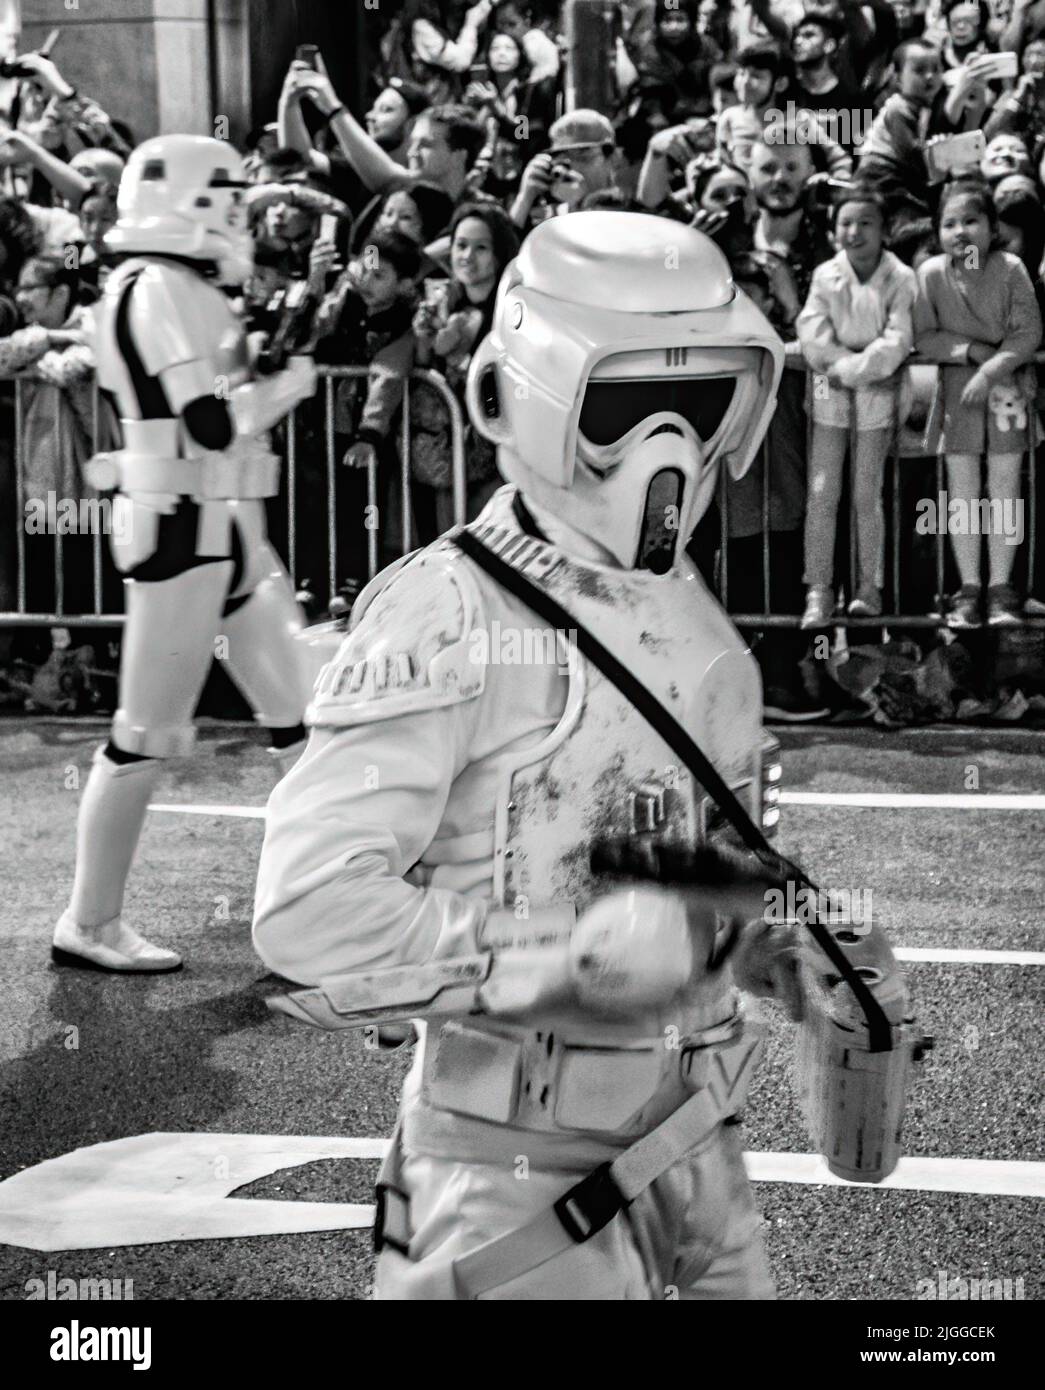 The Star Wars Storm Trooper at New Years Festival in Hong Kong Stock Photo